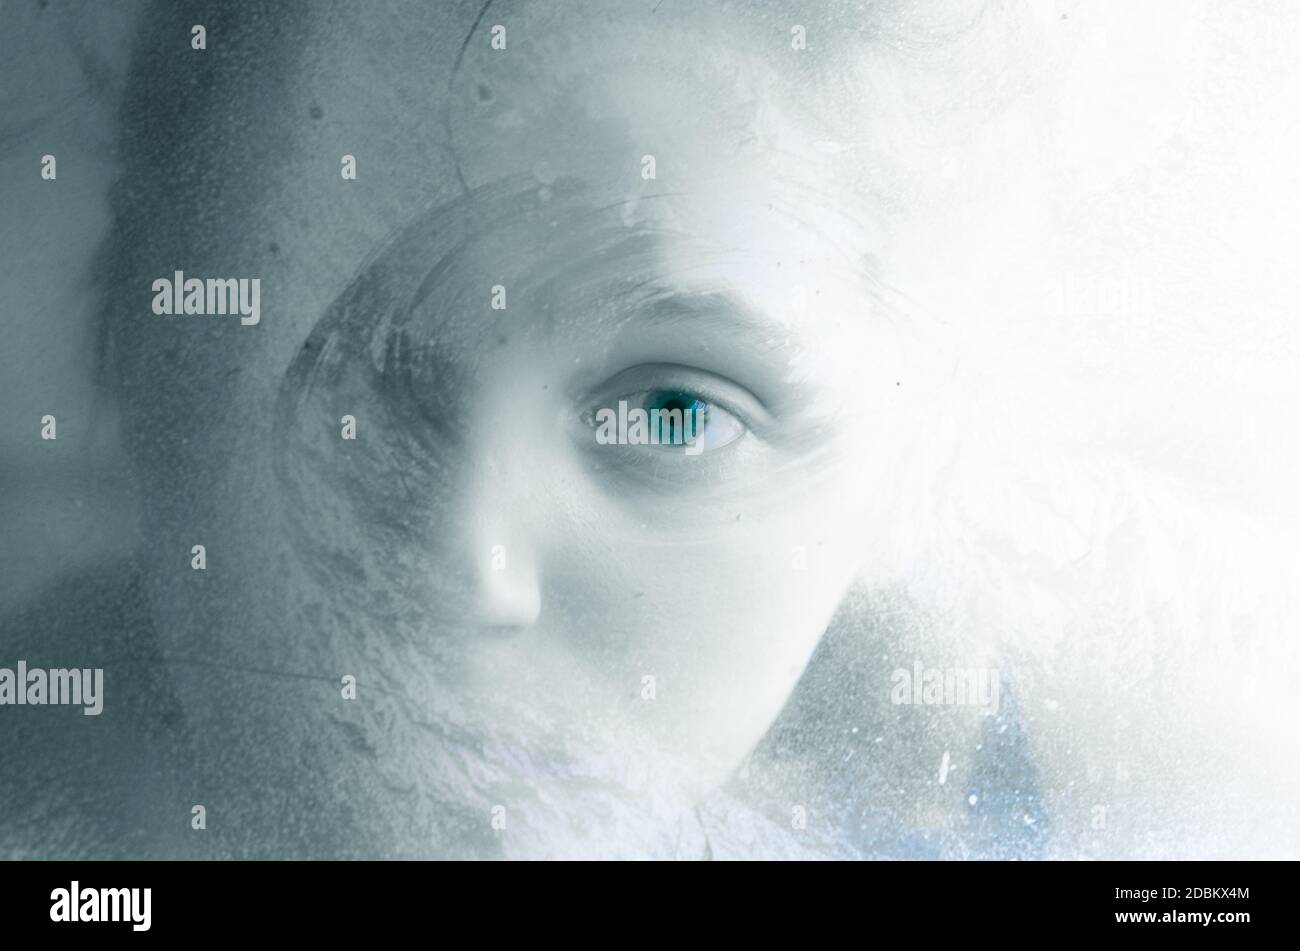 adorable little child face looking through frosty icy window experiment Stock Photo